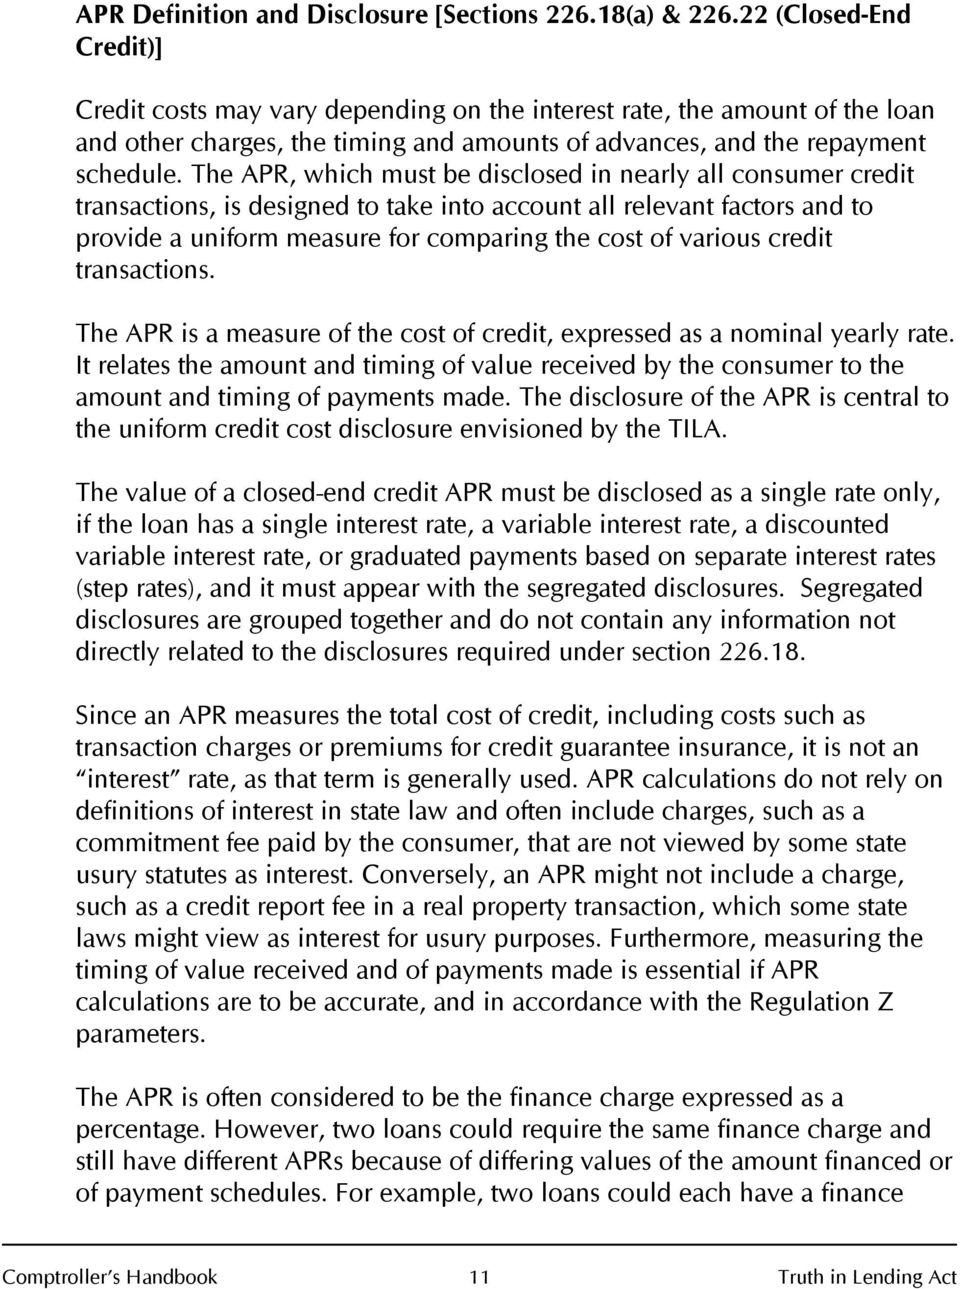 The APR, which must be disclosed in nearly all consumer credit transactions, is designed to take into account all relevant factors and to provide a uniform measure for comparing the cost of various